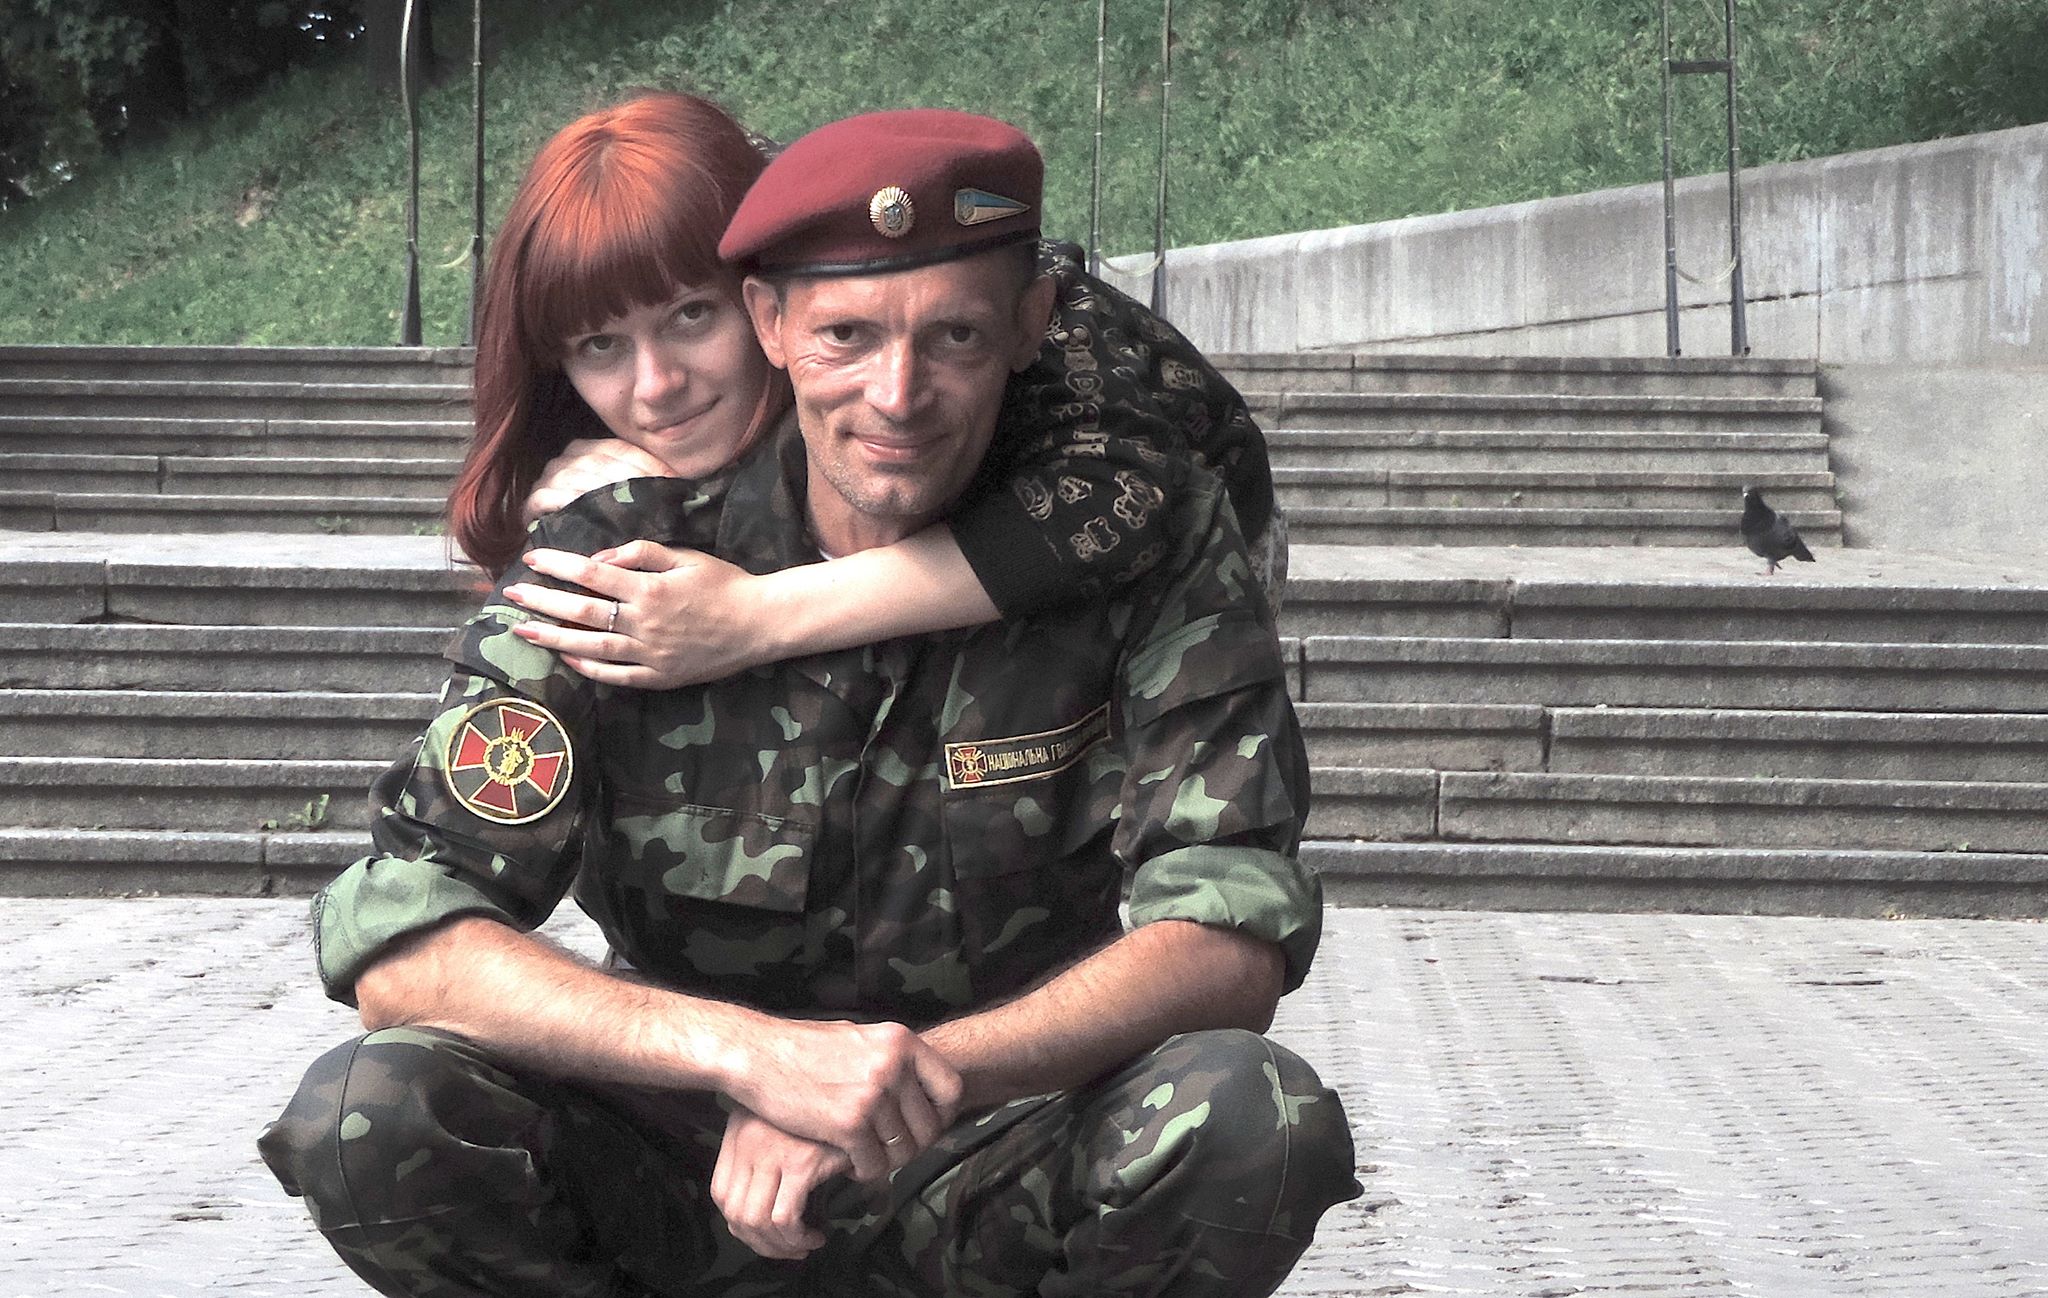 Documentary “My Father” tells story of fallen war hero and helps heal wounds of war